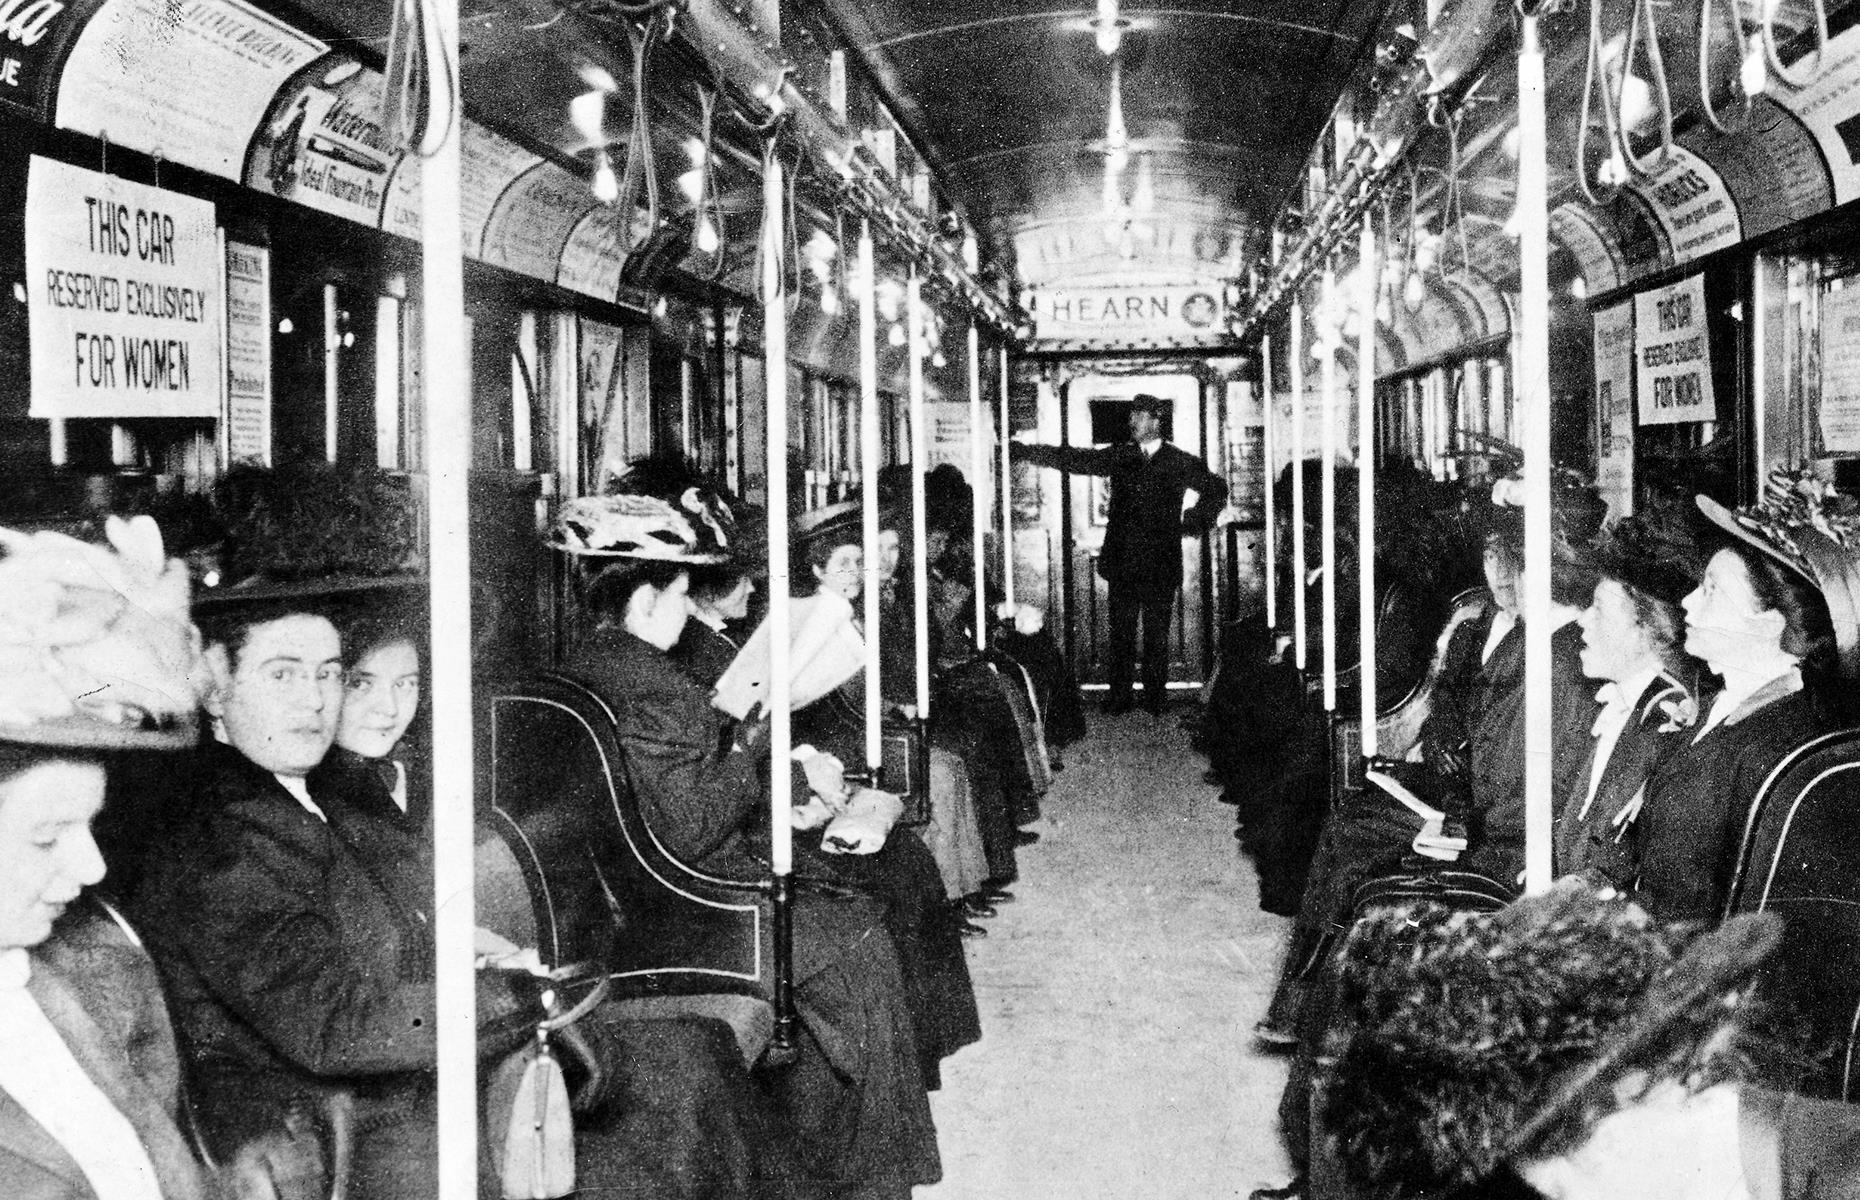 <p>Women-only carriages were debuted on the Uptown Hudson Tubes in 1909. The last car on each train was reserved for female passengers and became nicknamed the "suffragette car". One such car is snapped here – notice the multiple "women-only" signs and the impressive Edwardian-era headgear.</p>  <p><strong><a href="https://www.loveexploring.com/galleries/95741/incredible-images-of-the-worlds-tourist-attractions-under-construction">Discover incredible images of the world's tourist attractions under construction</a></strong></p>